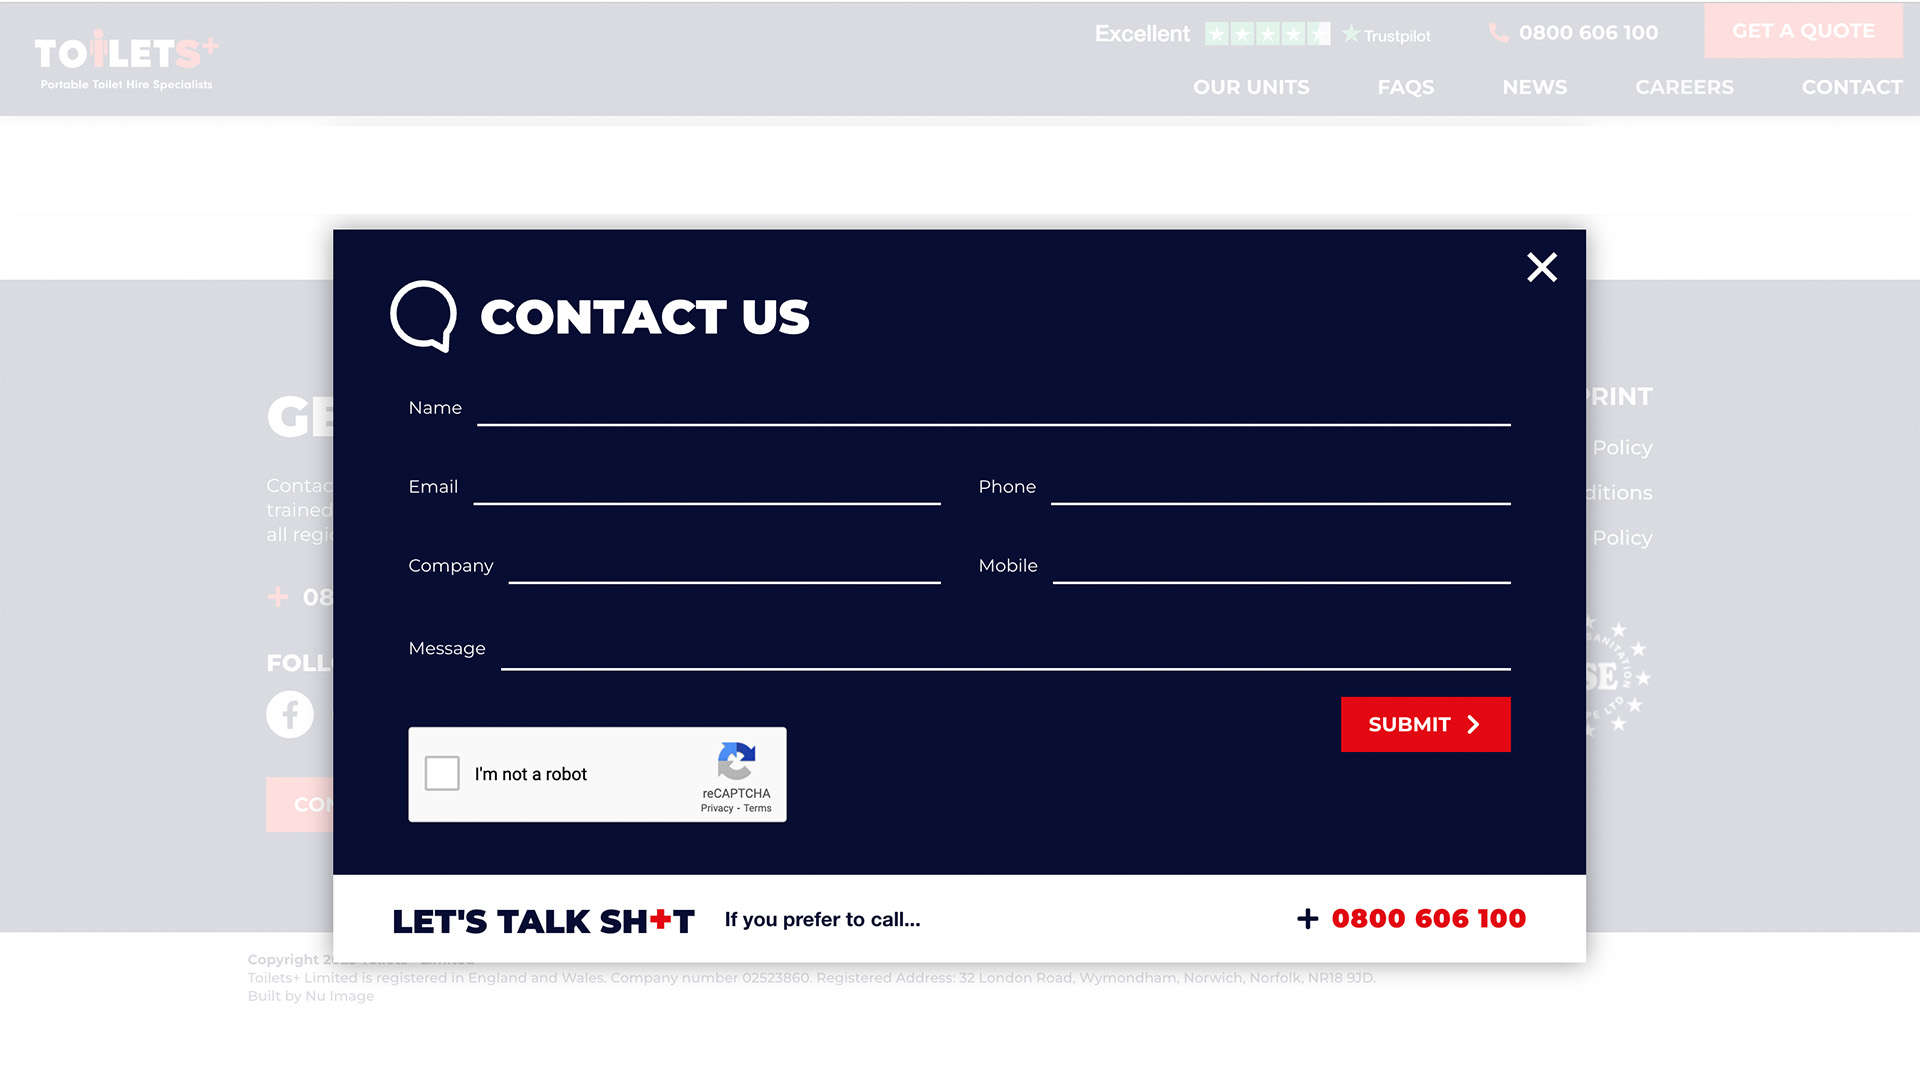 Toilets+ contact form